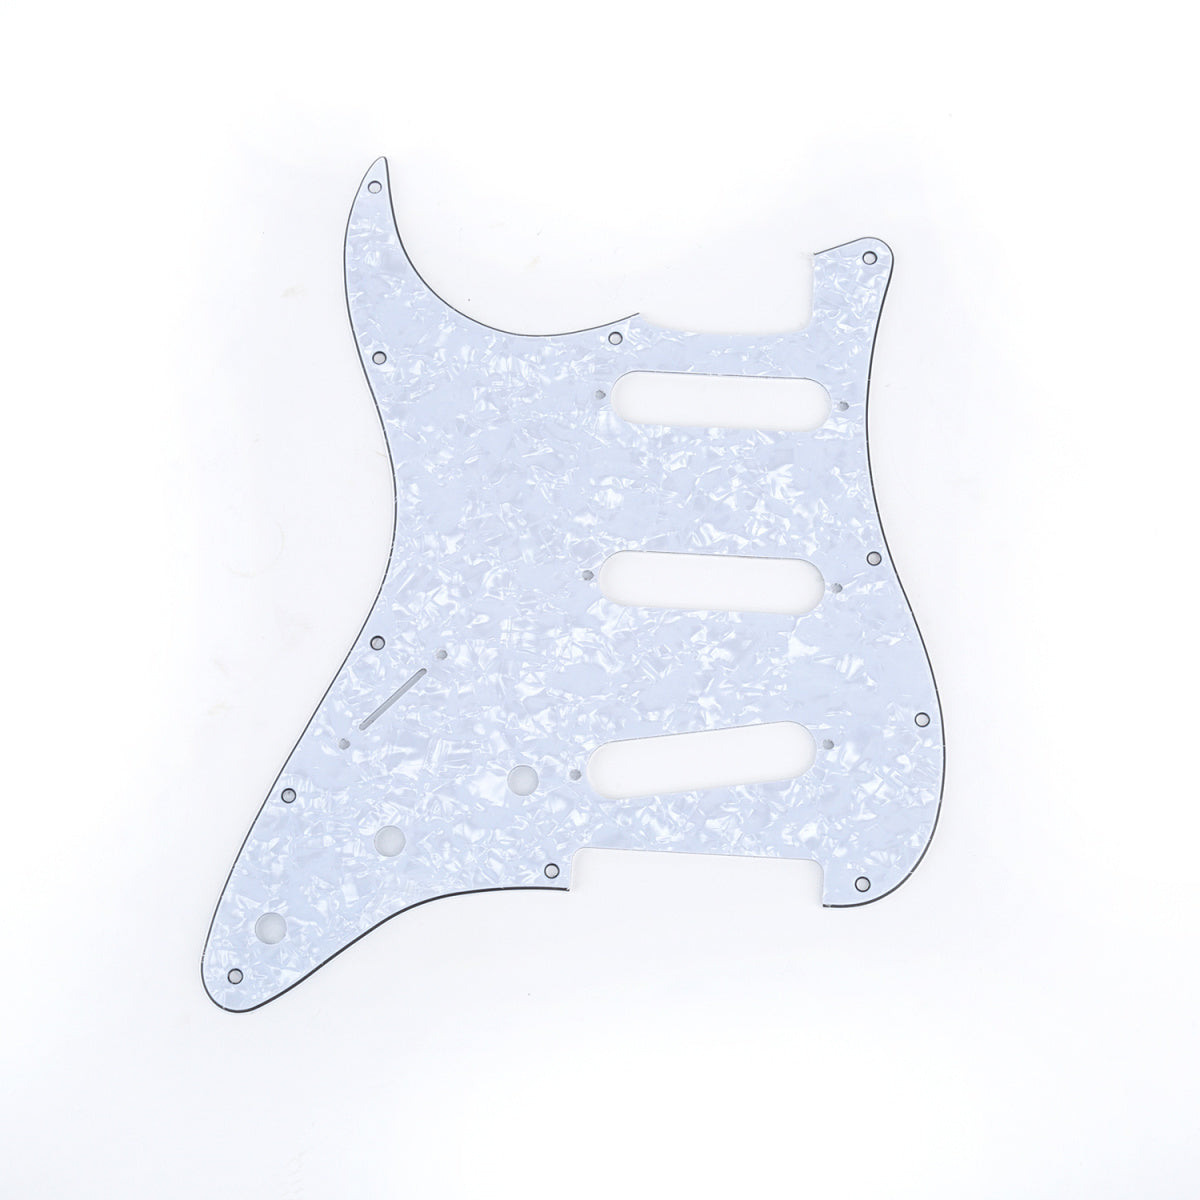 Musiclily SSS 11 Hole Left Handed Strat Guitar Pickguard for Fender USA/Mexican Made Standard Stratocaster Standard Modern Style, 4Ply White Pearl